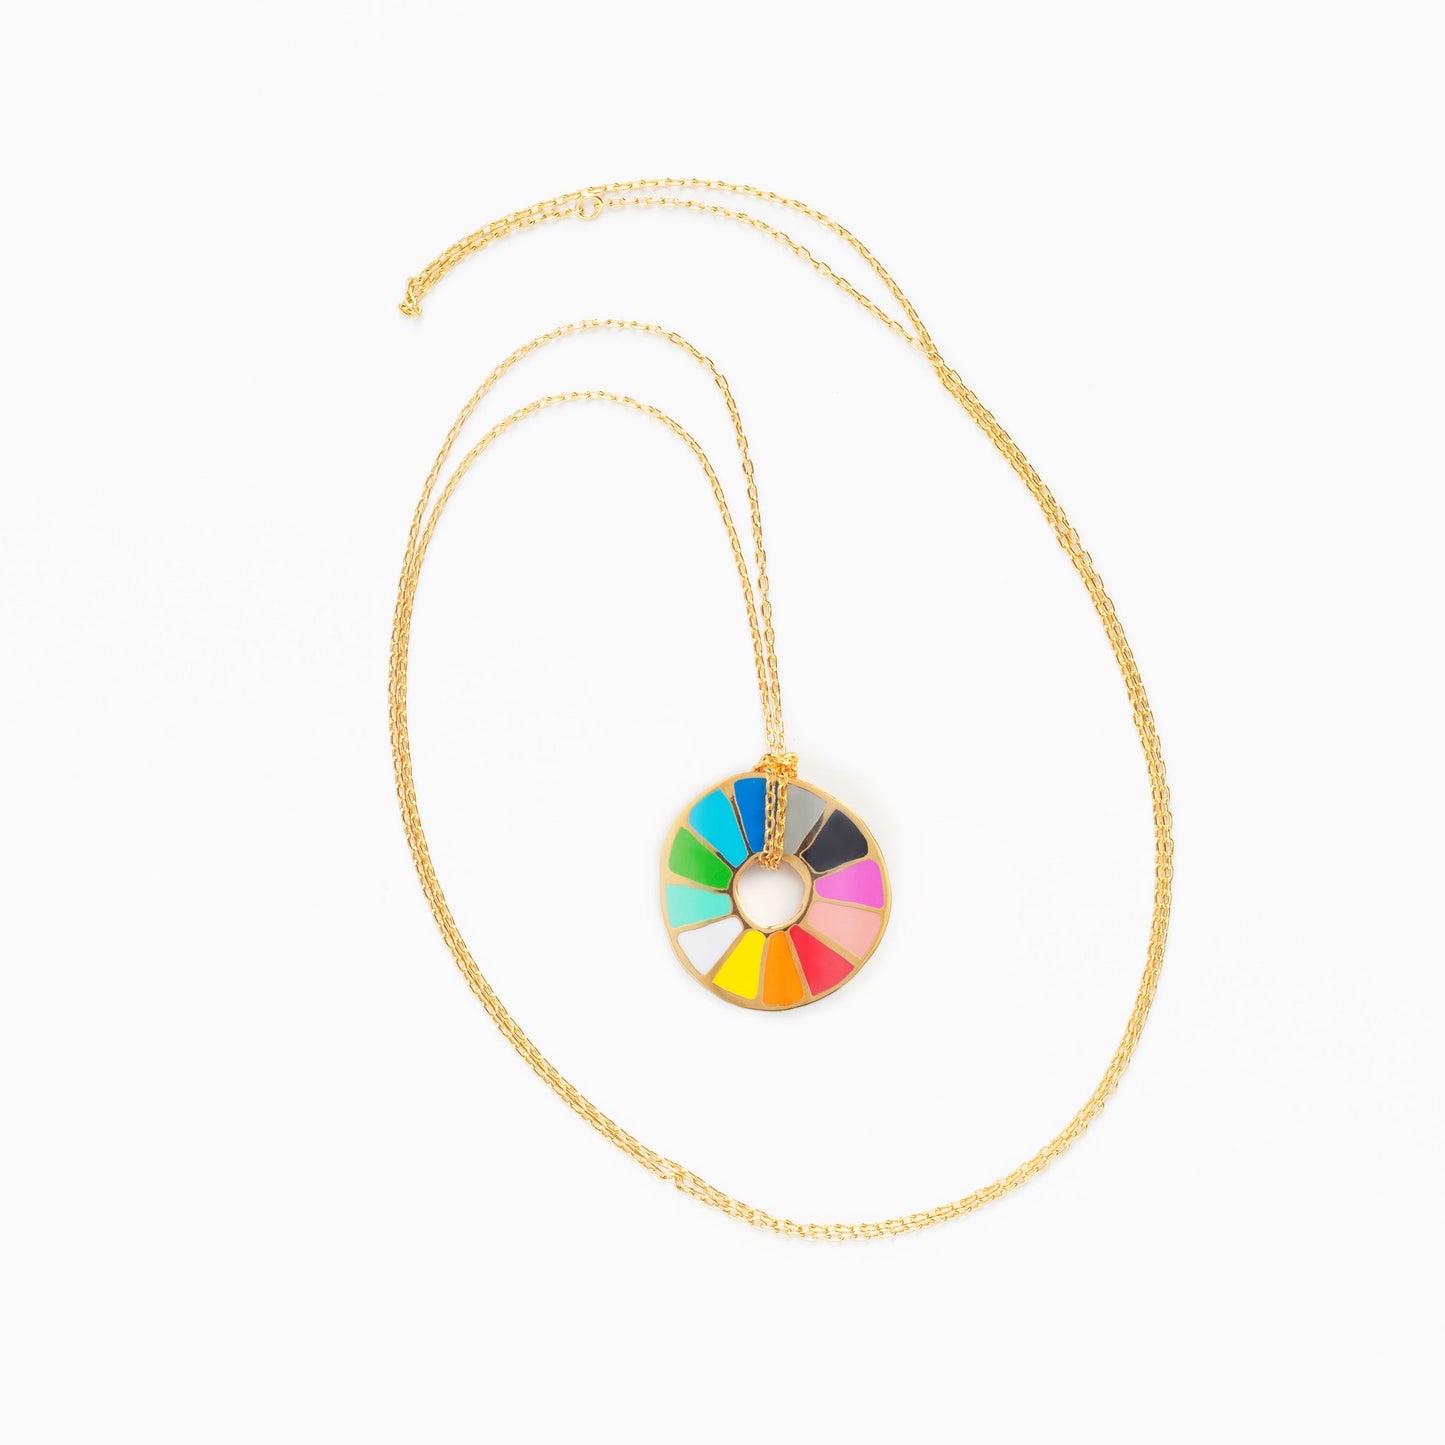 color wheel pendant on gold chain on white background.